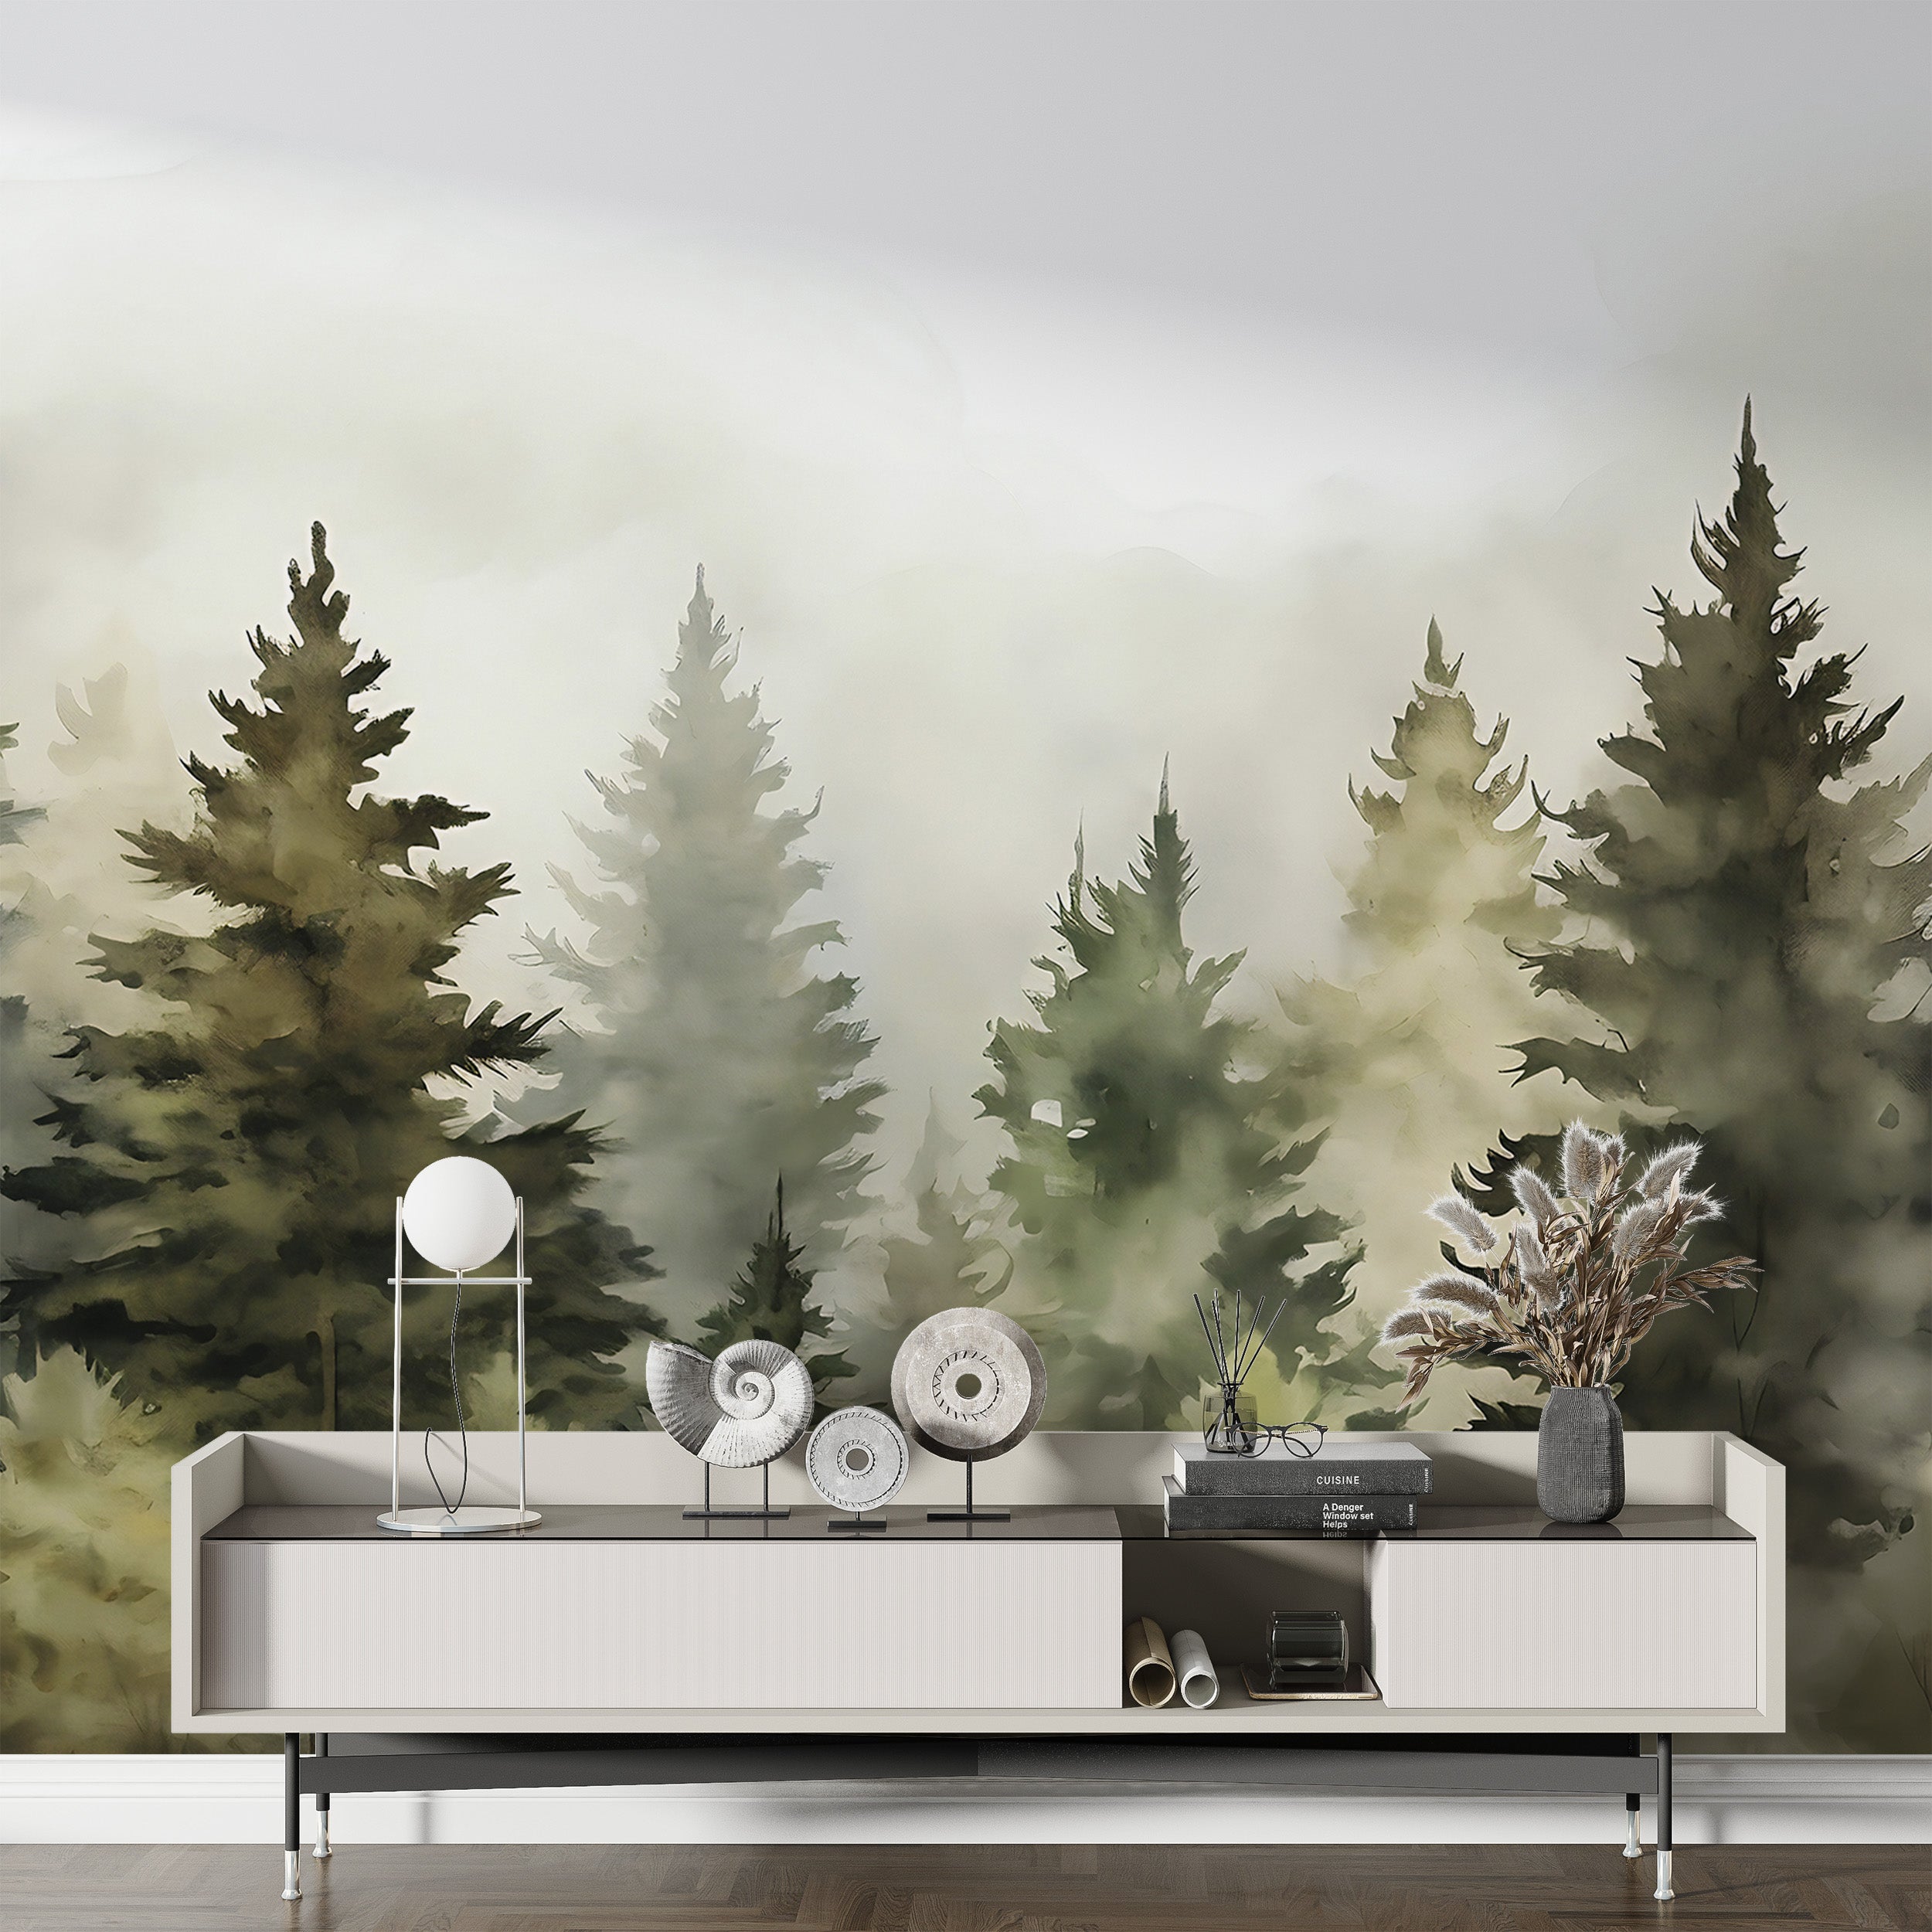 Effortless Application of Self-Adhesive Forest Mural